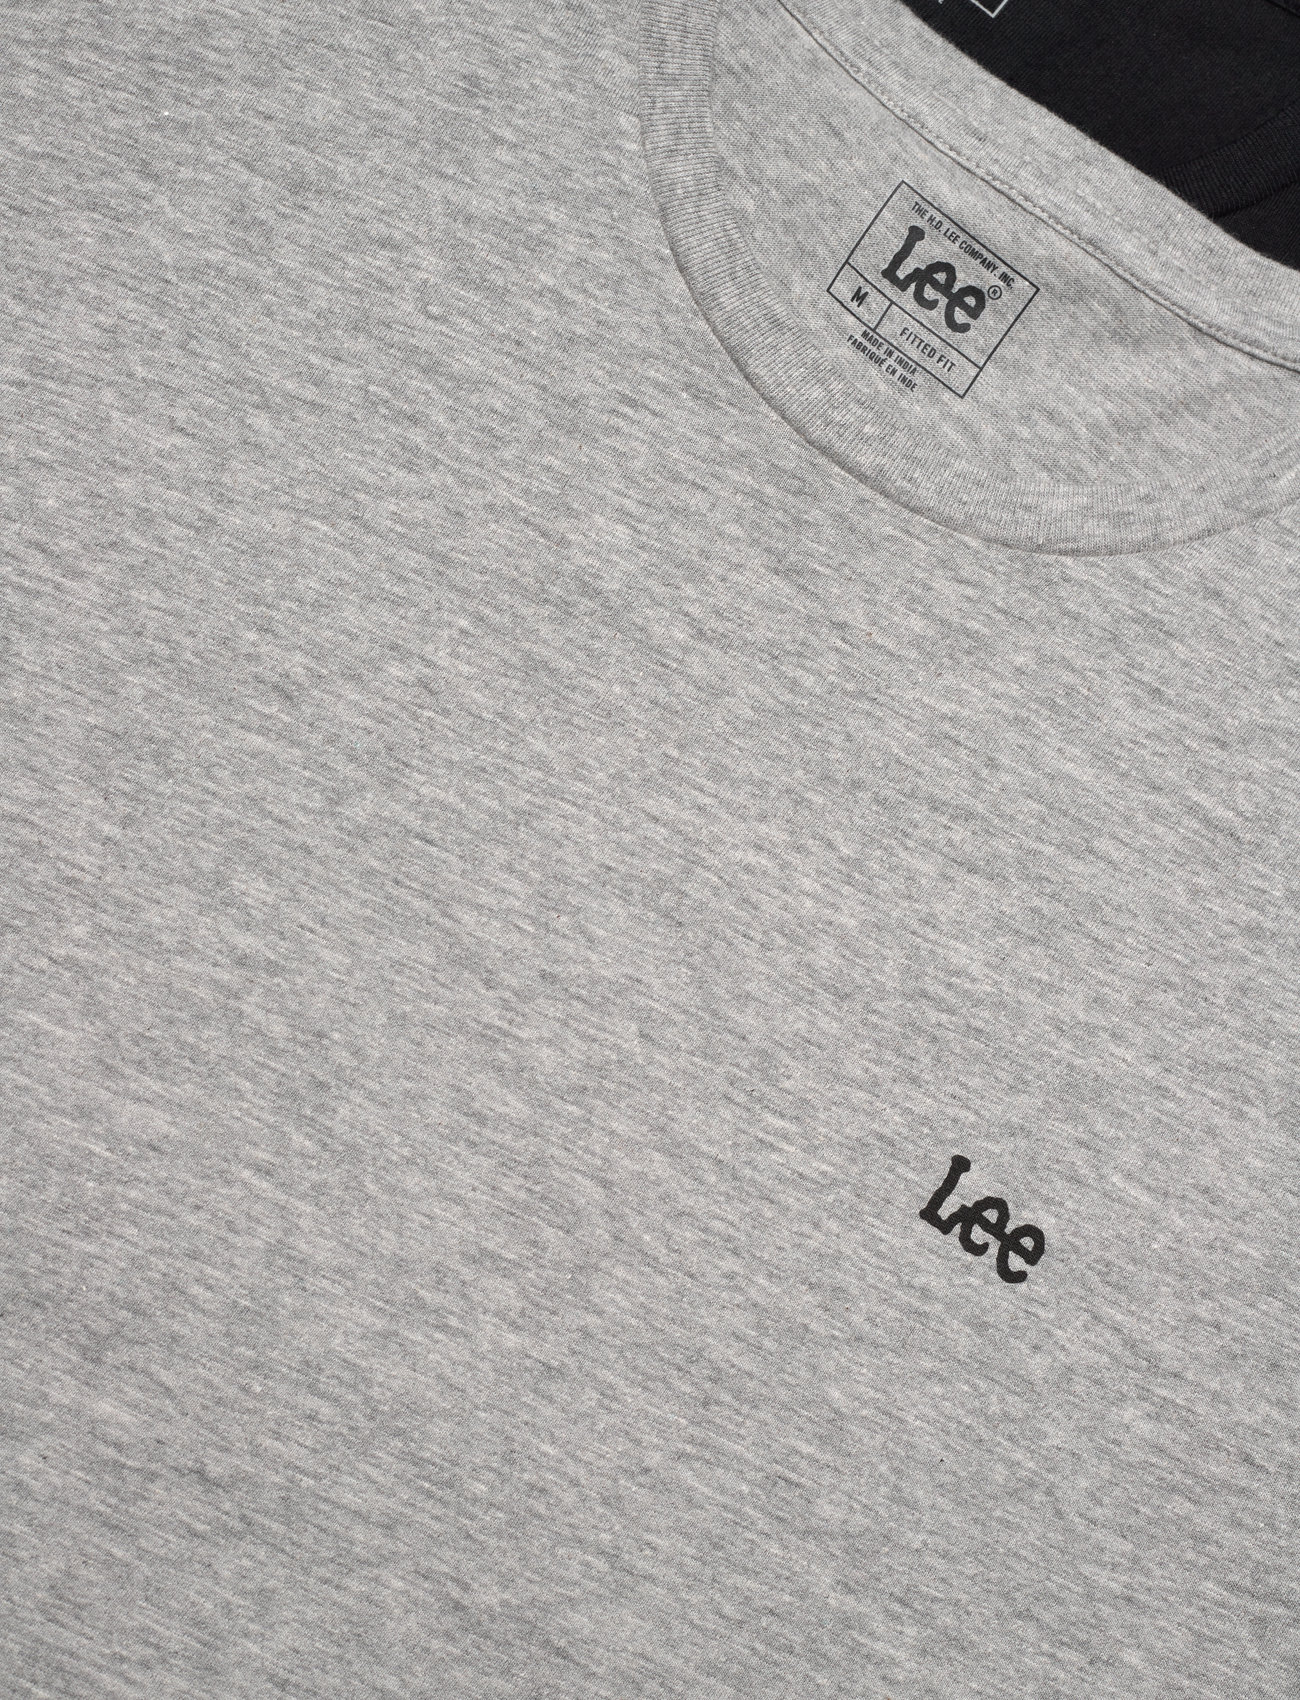 Lee Jeans - TWIN PACK CREW - short-sleeved t-shirts - black/grey - 1